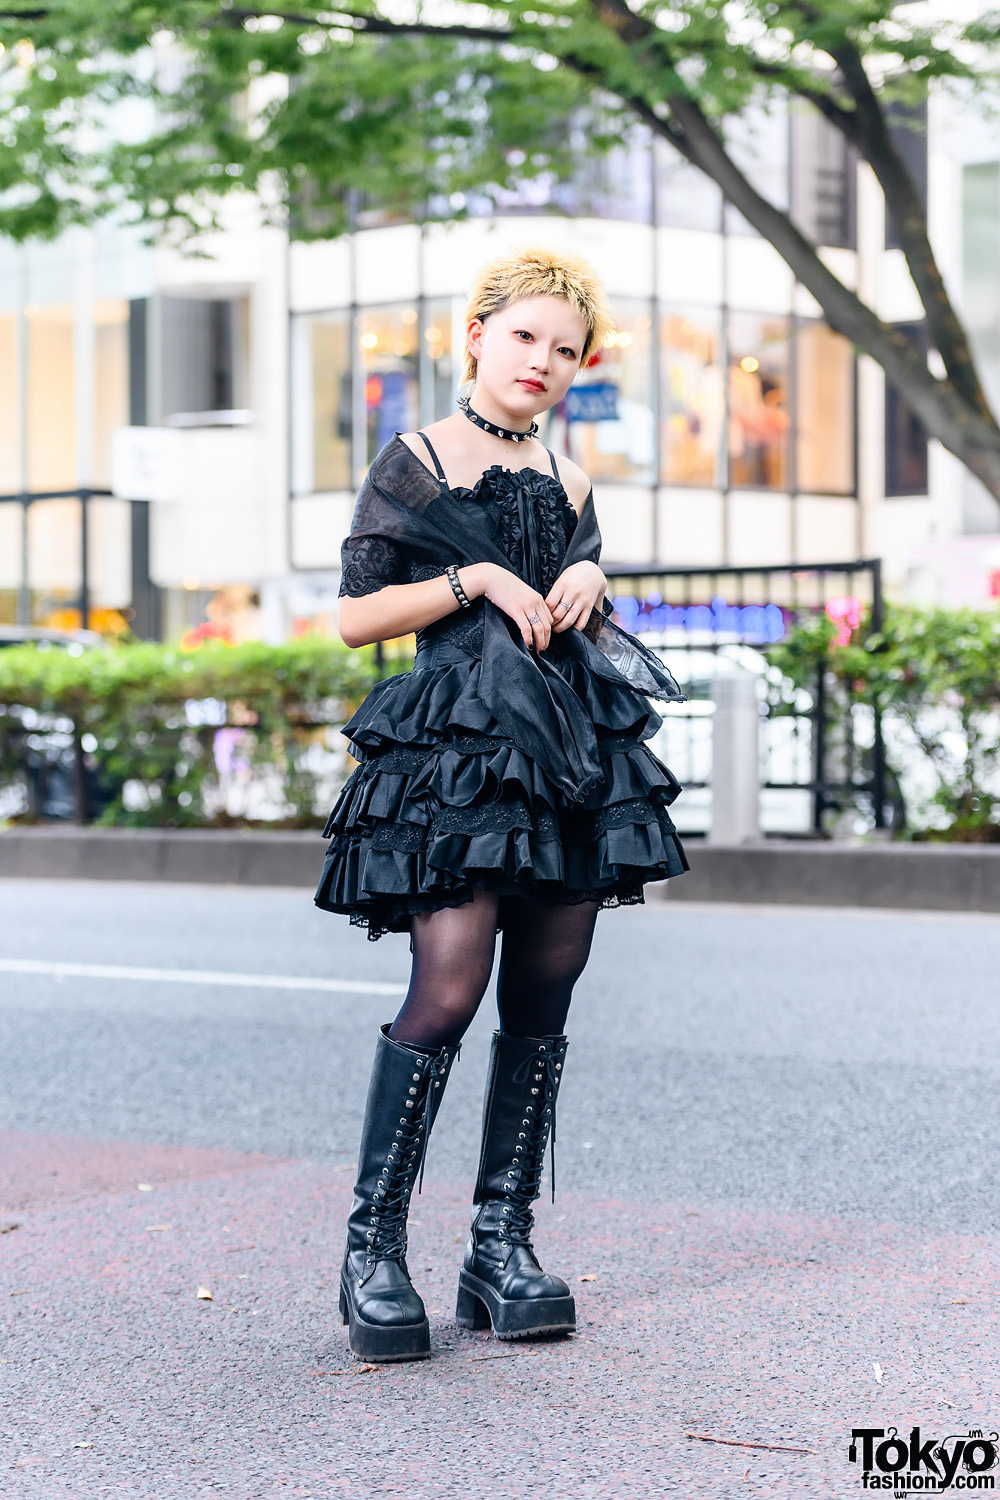 Gothic Grunge Tokyo Style w/ Cropped Hair, Spiked Choker, Tiered Corset Dress, Organza Shawl, Sheer Stockings & Demonia Knee-High Boots